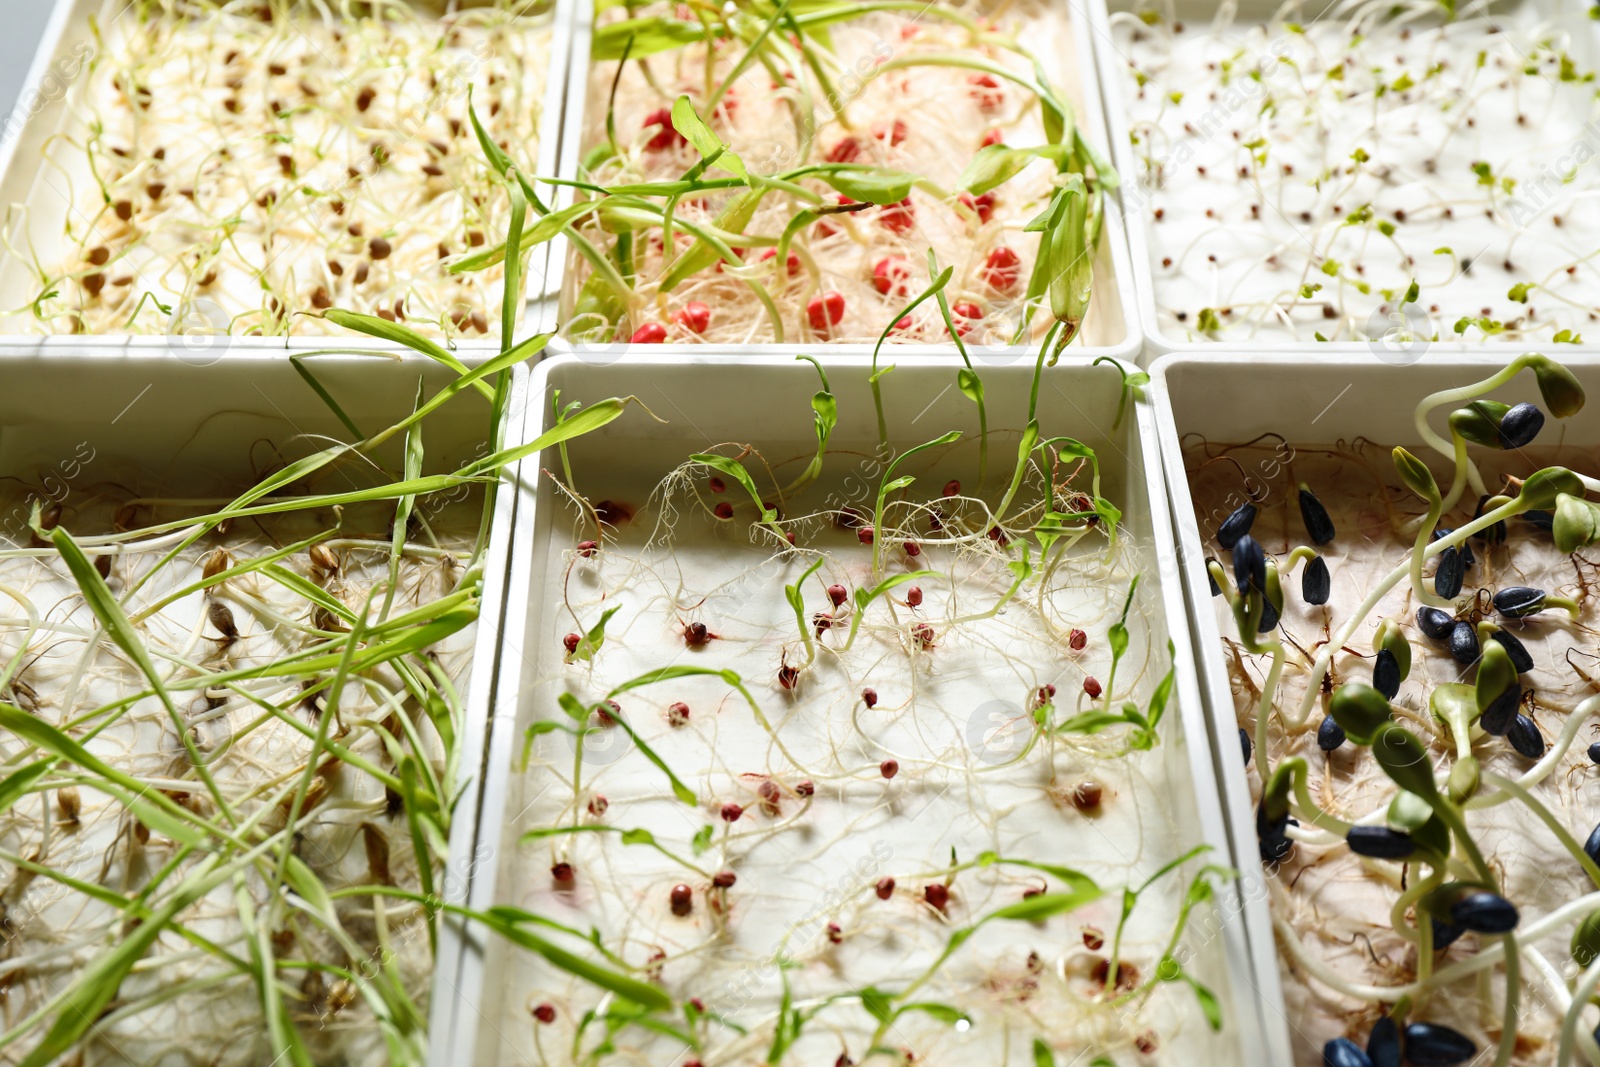 Photo of Containers with sprouted seeds, closeup. Laboratory research